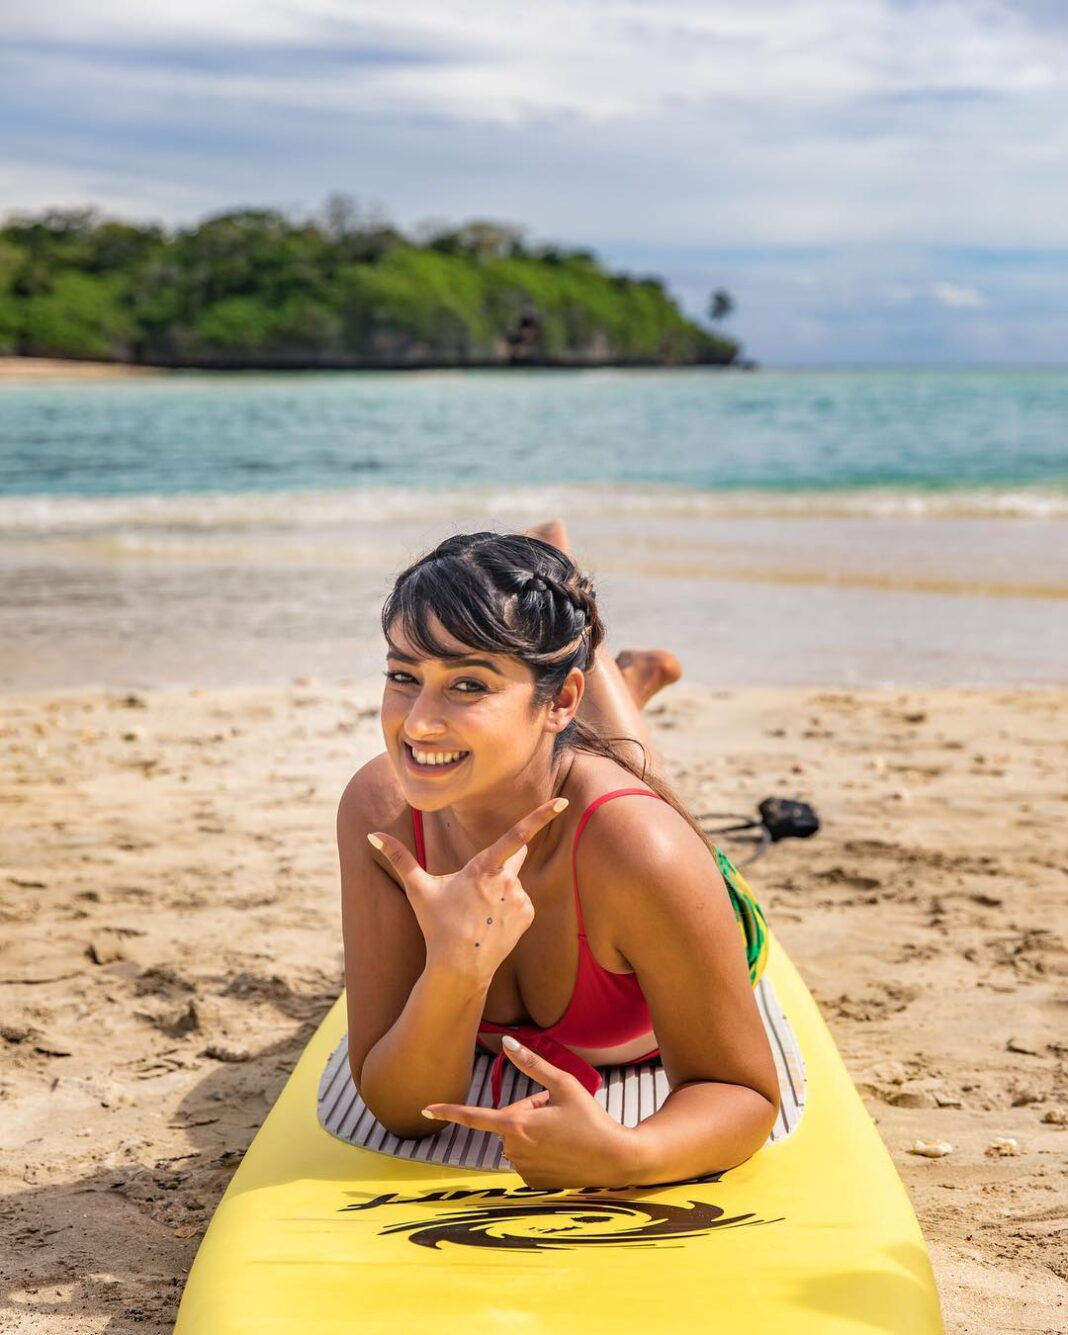 Ileana D'Cruz Instagram - World Class Surfing with some epic swells where else but in Fiji! If you love Surfing you will love Fiji ! Come experience some awesome waves in the magnificent waters of Fiji! #fijinow #fijihappy #ileanainfiji #bulahappiness 📷 @bhushanbagadiapositives InterContinental Fiji Golf Resort & Spa